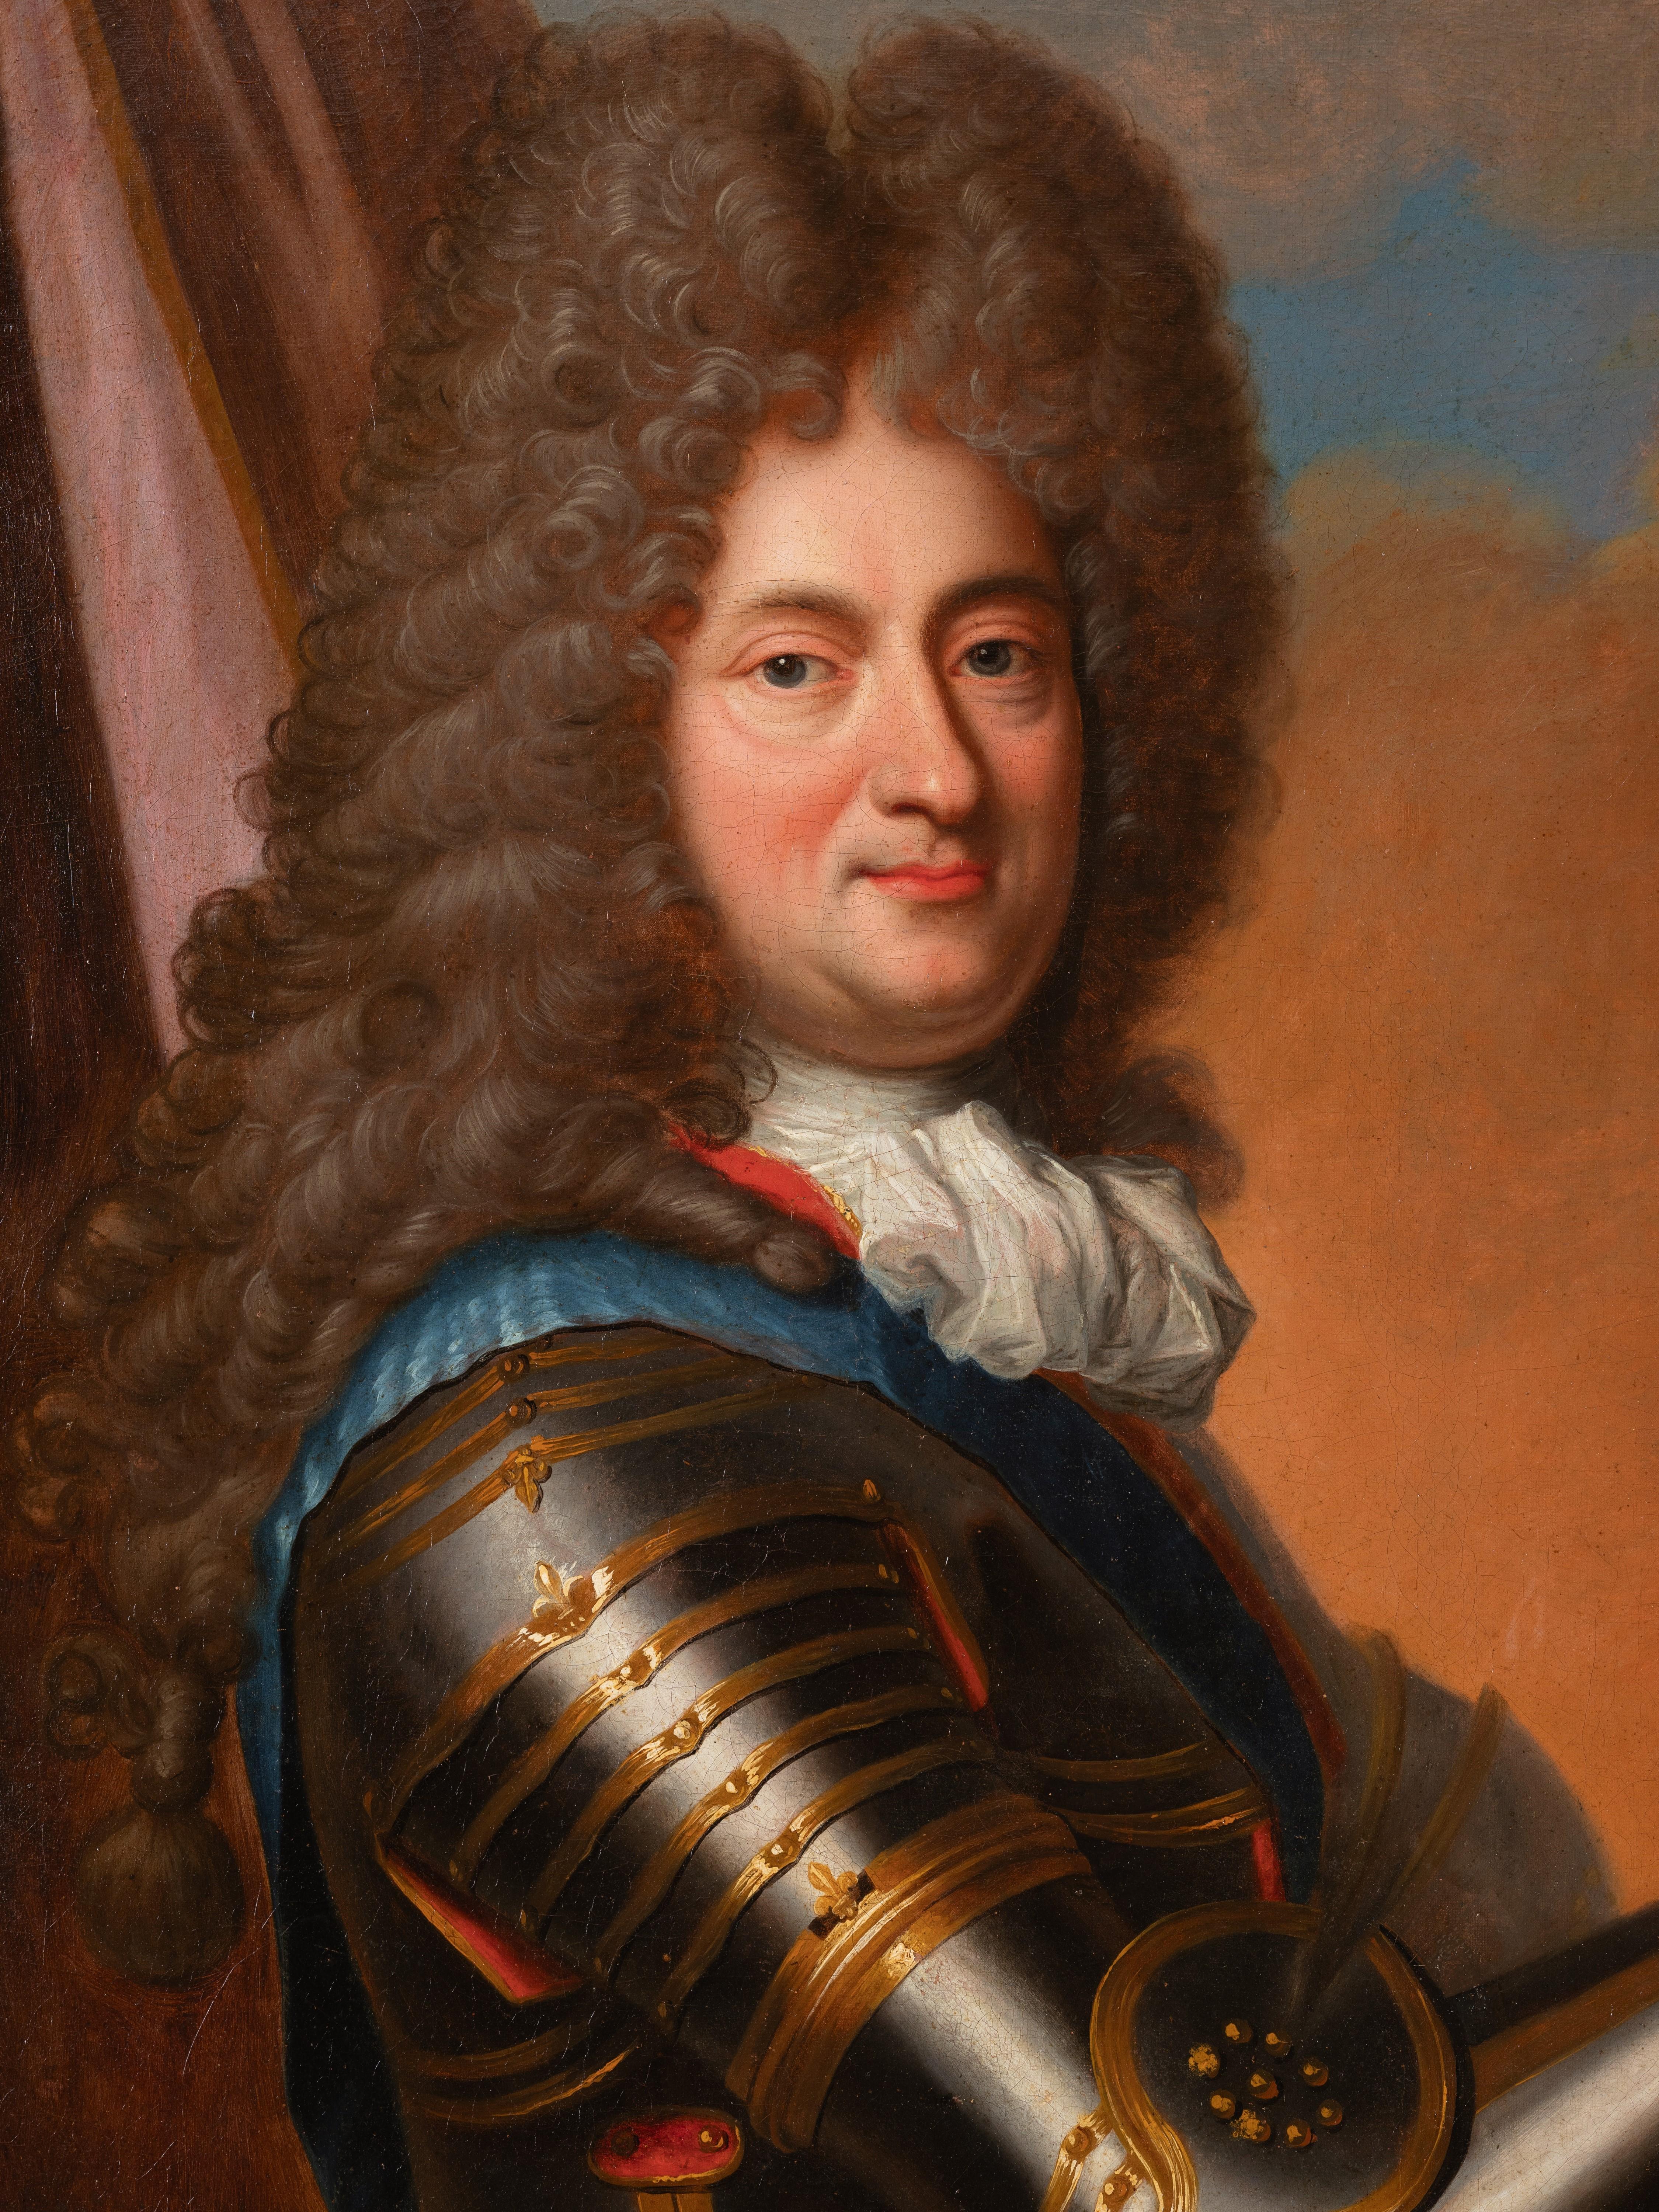 Philippe, Duke of Orléans (1674 -1723), Regent of France
Workshop of Jean Baptiste Santerre (Magny en Vexin, 1658 - Paris, 1717)
French school circa 1716-1718
Oil on canvas: h. 95 cm, w. 74 cm
Important Louis XIV period gilded and finely carved oak